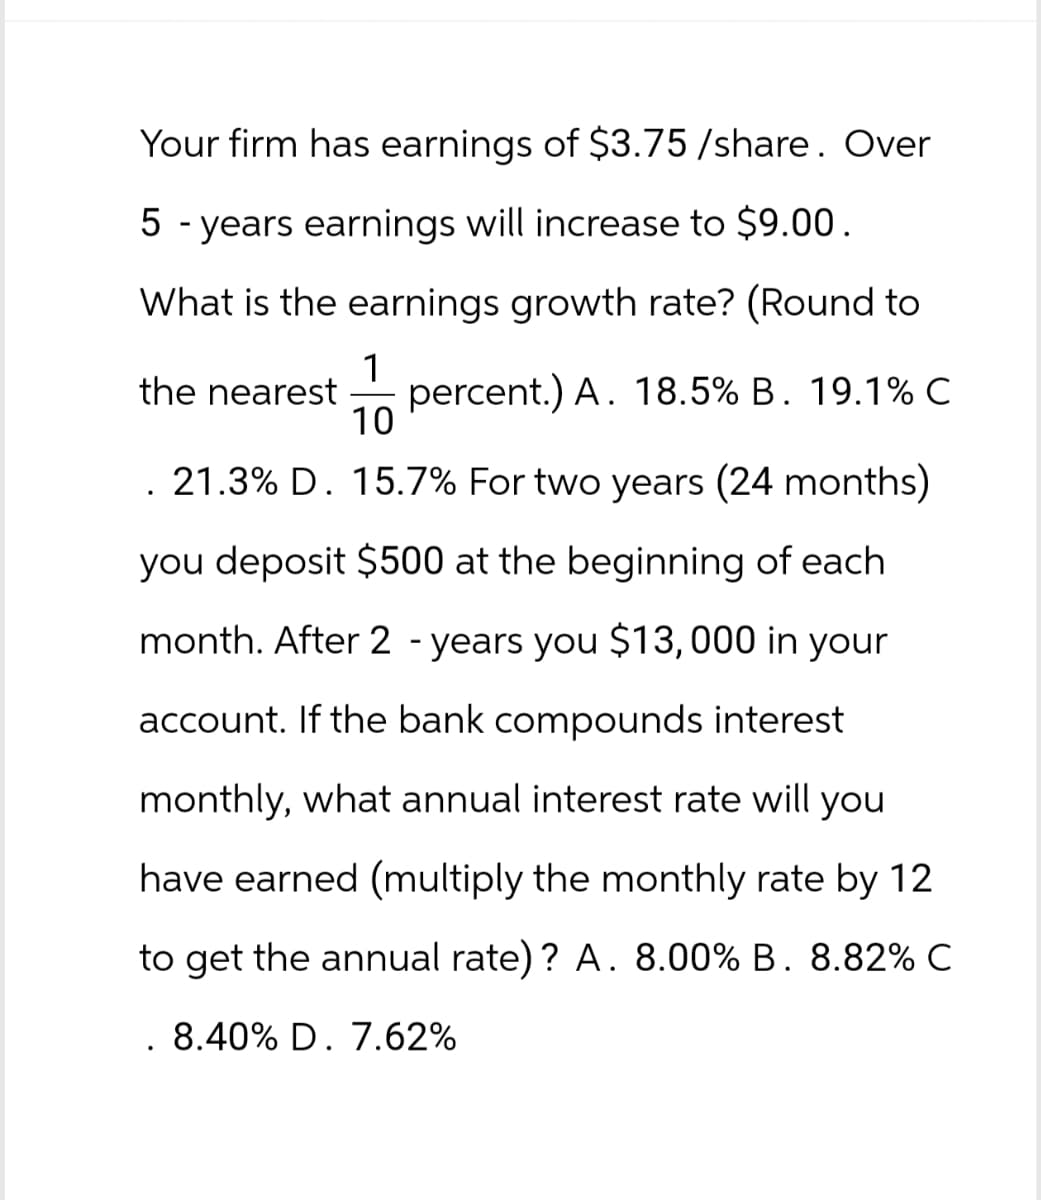 Your firm has earnings of $3.75/share. Over
5-years earnings will increase to $9.00.
What is the earnings growth rate? (Round to
1
10
the nearest percent.) A. 18.5% B. 19.1% C
. 21.3% D. 15.7% For two years (24 months)
you deposit $500 at the beginning of each
month. After 2 years you $13,000 in your
account. If the bank compounds interest
monthly, what annual interest rate will you
have earned (multiply the monthly rate by 12
to get the annual rate)? A. 8.00% B. 8.82% C
. 8.40% D. 7.62%